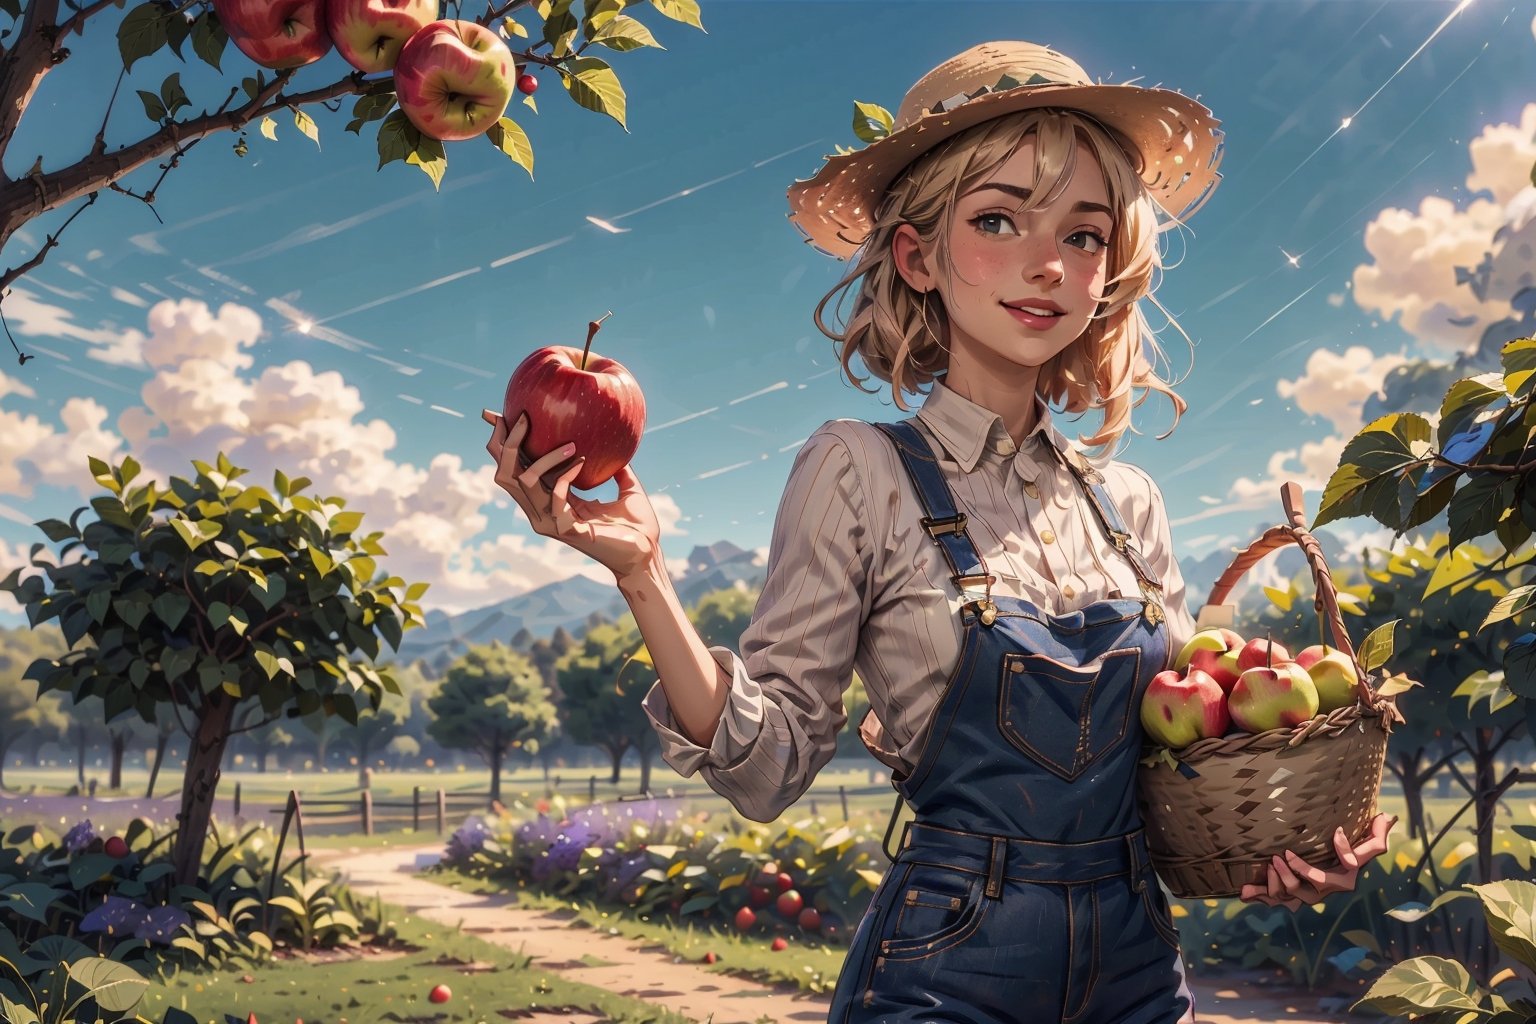 (4k), (masterpiece), (best quality),(extremely intricate), (realistic), (sharp focus), (award winning), (cinematic lighting), (extremely detailed), 

A young girl farmer with a basket full of ripe apples, standing in a lush orchard. She is wearing a straw hat and overalls, and she has a smile on her face. She is holding an apple in one hand and reaching for another with the other.

,DonMl1ghtning,violet evergarden,EpicSky